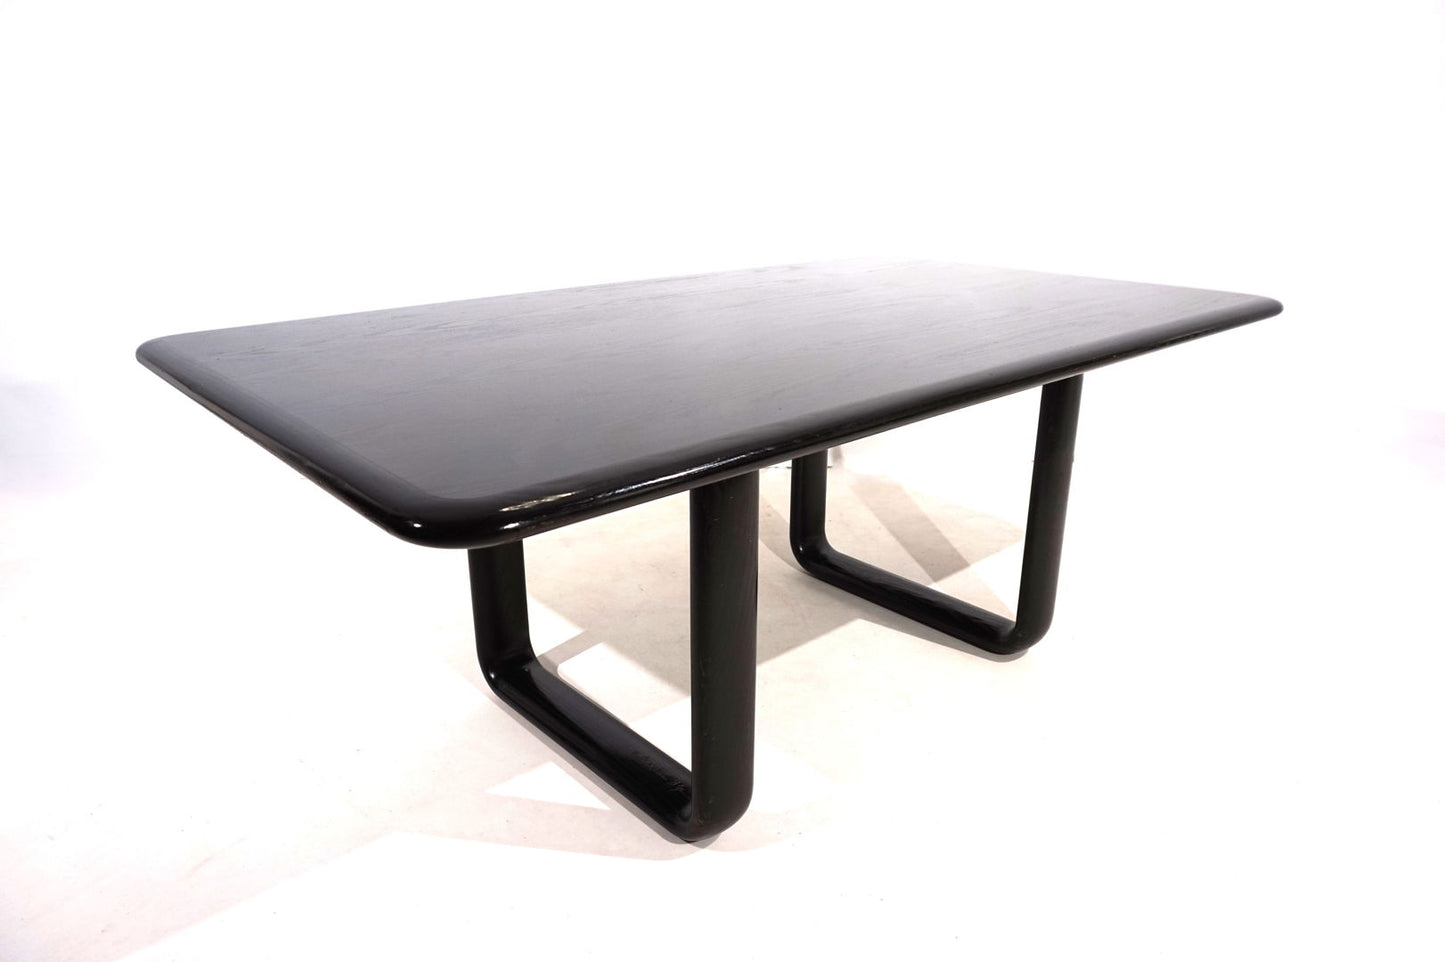 Rosenthal Hombre dining table by Burkhard Vogtherr